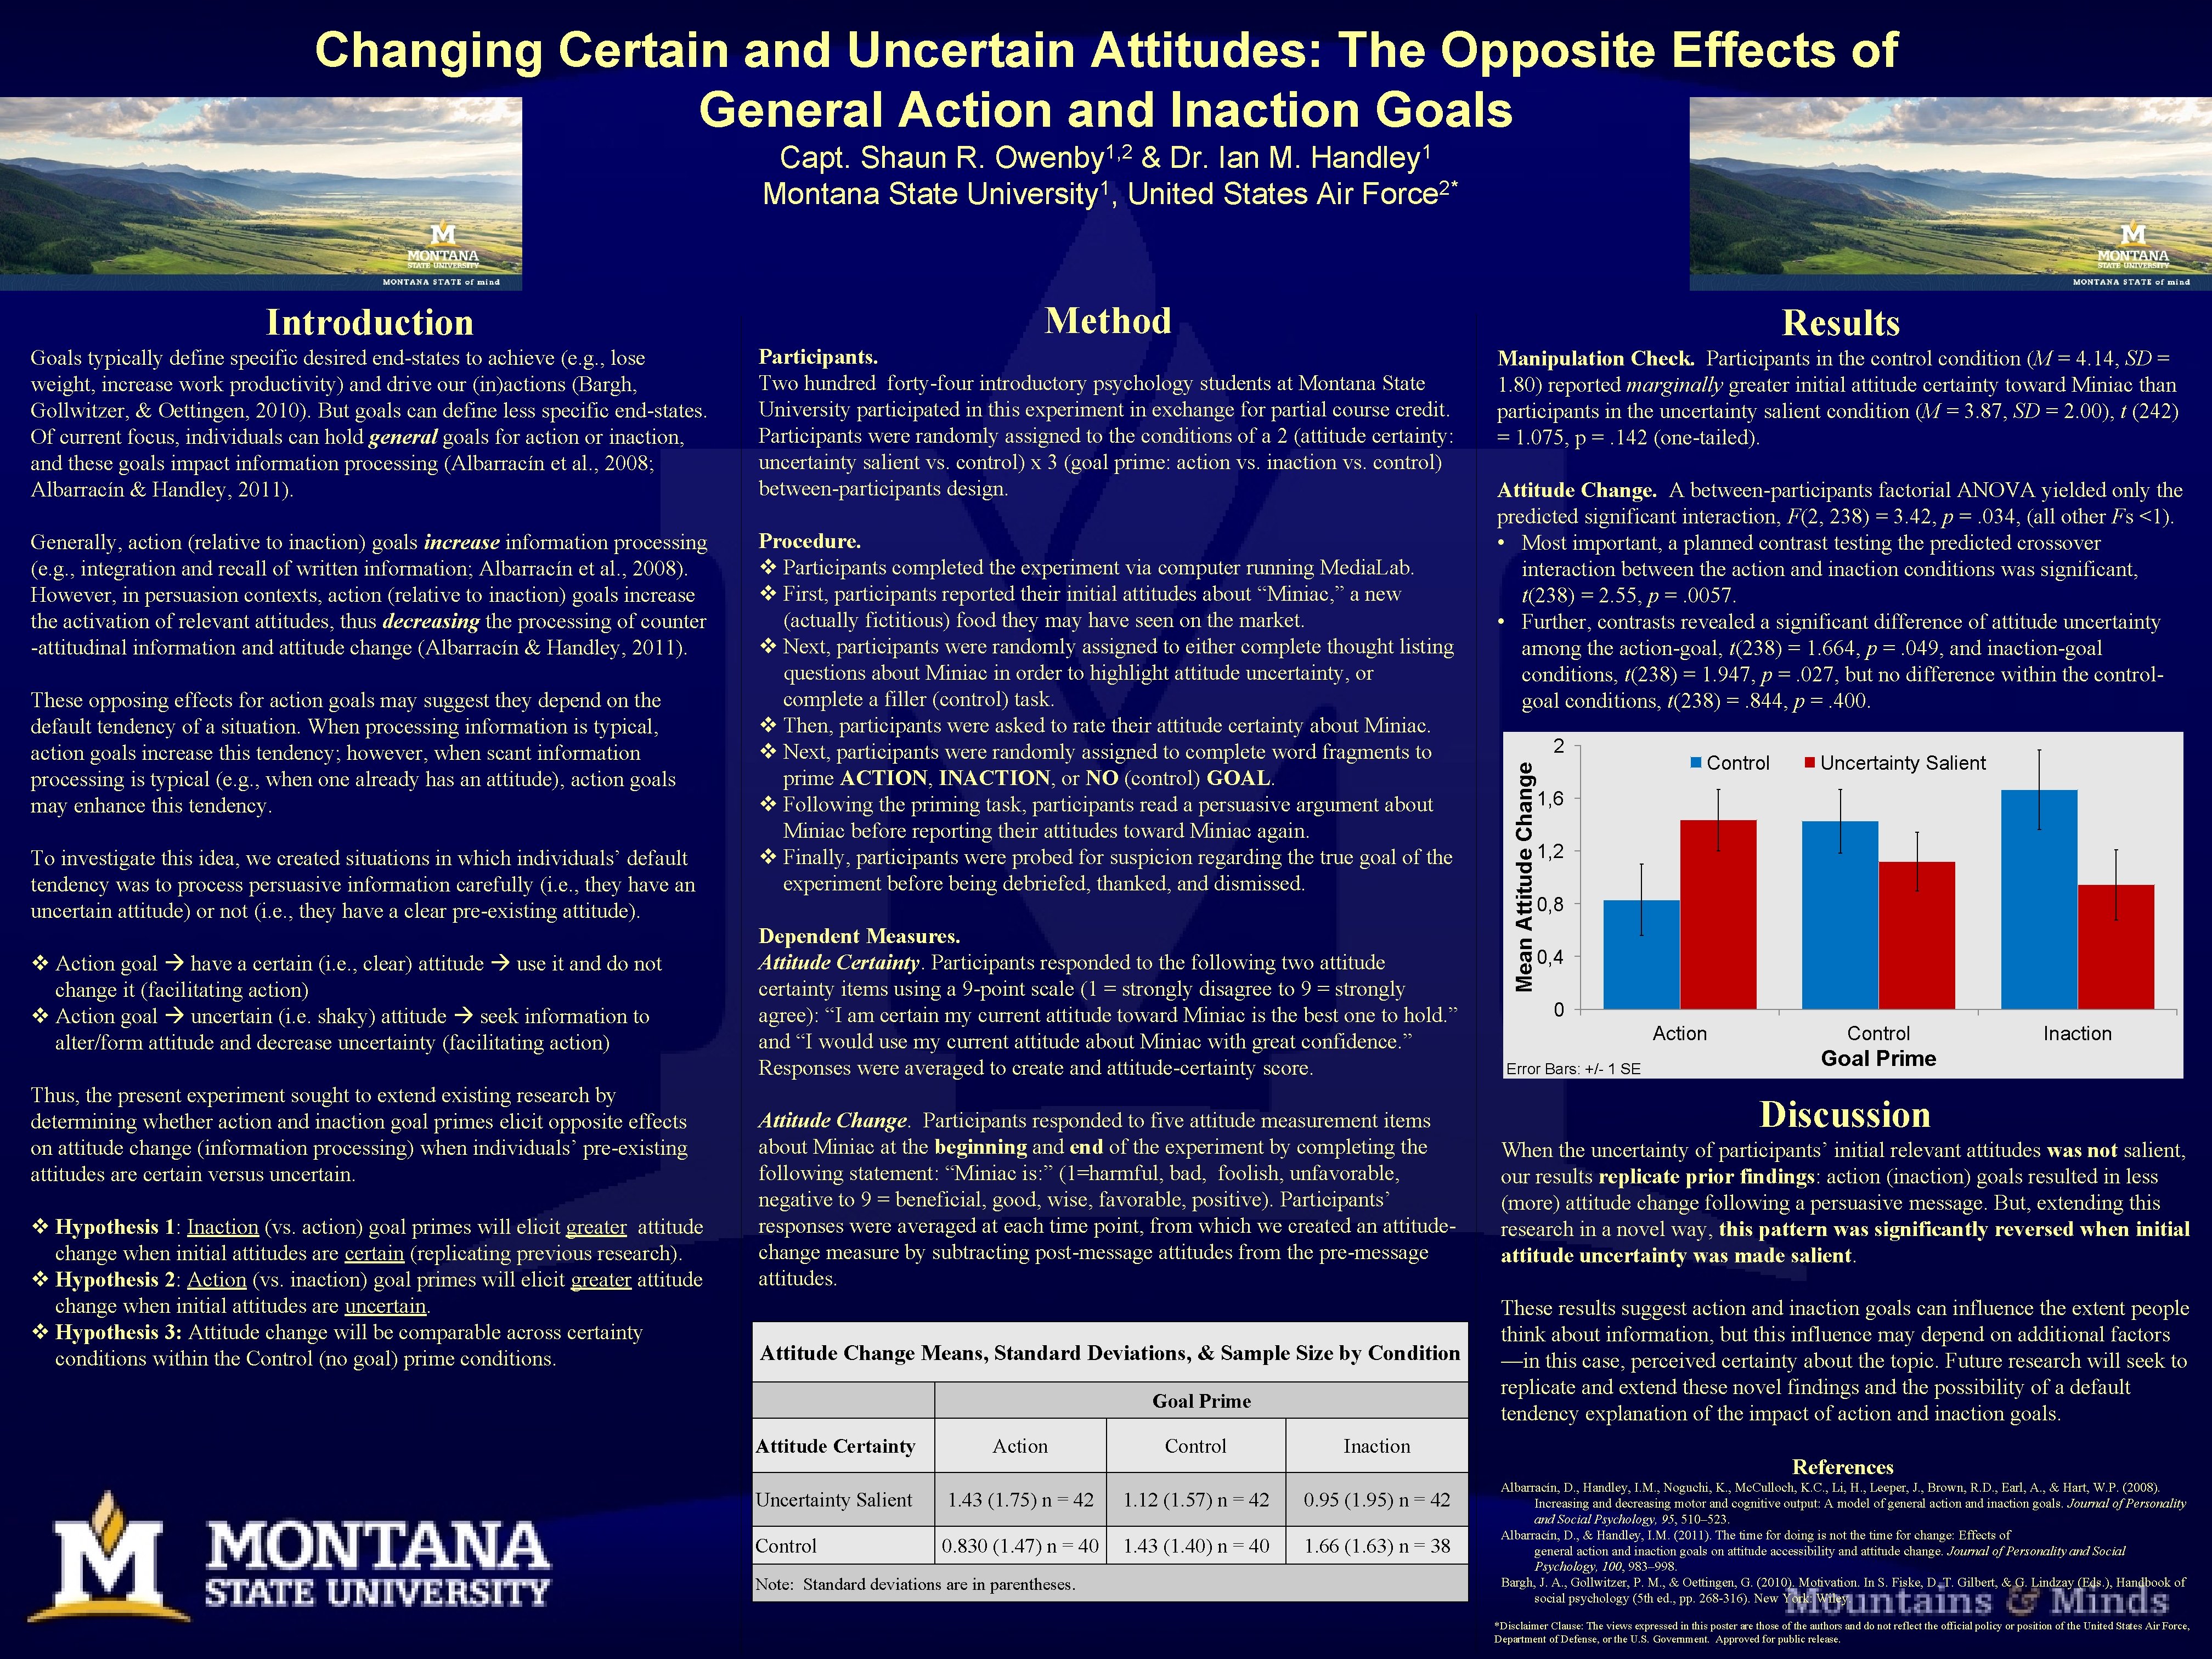 Changing Certain and Uncertain Attitudes: The Opposite Effects of General Action and Inaction Goals